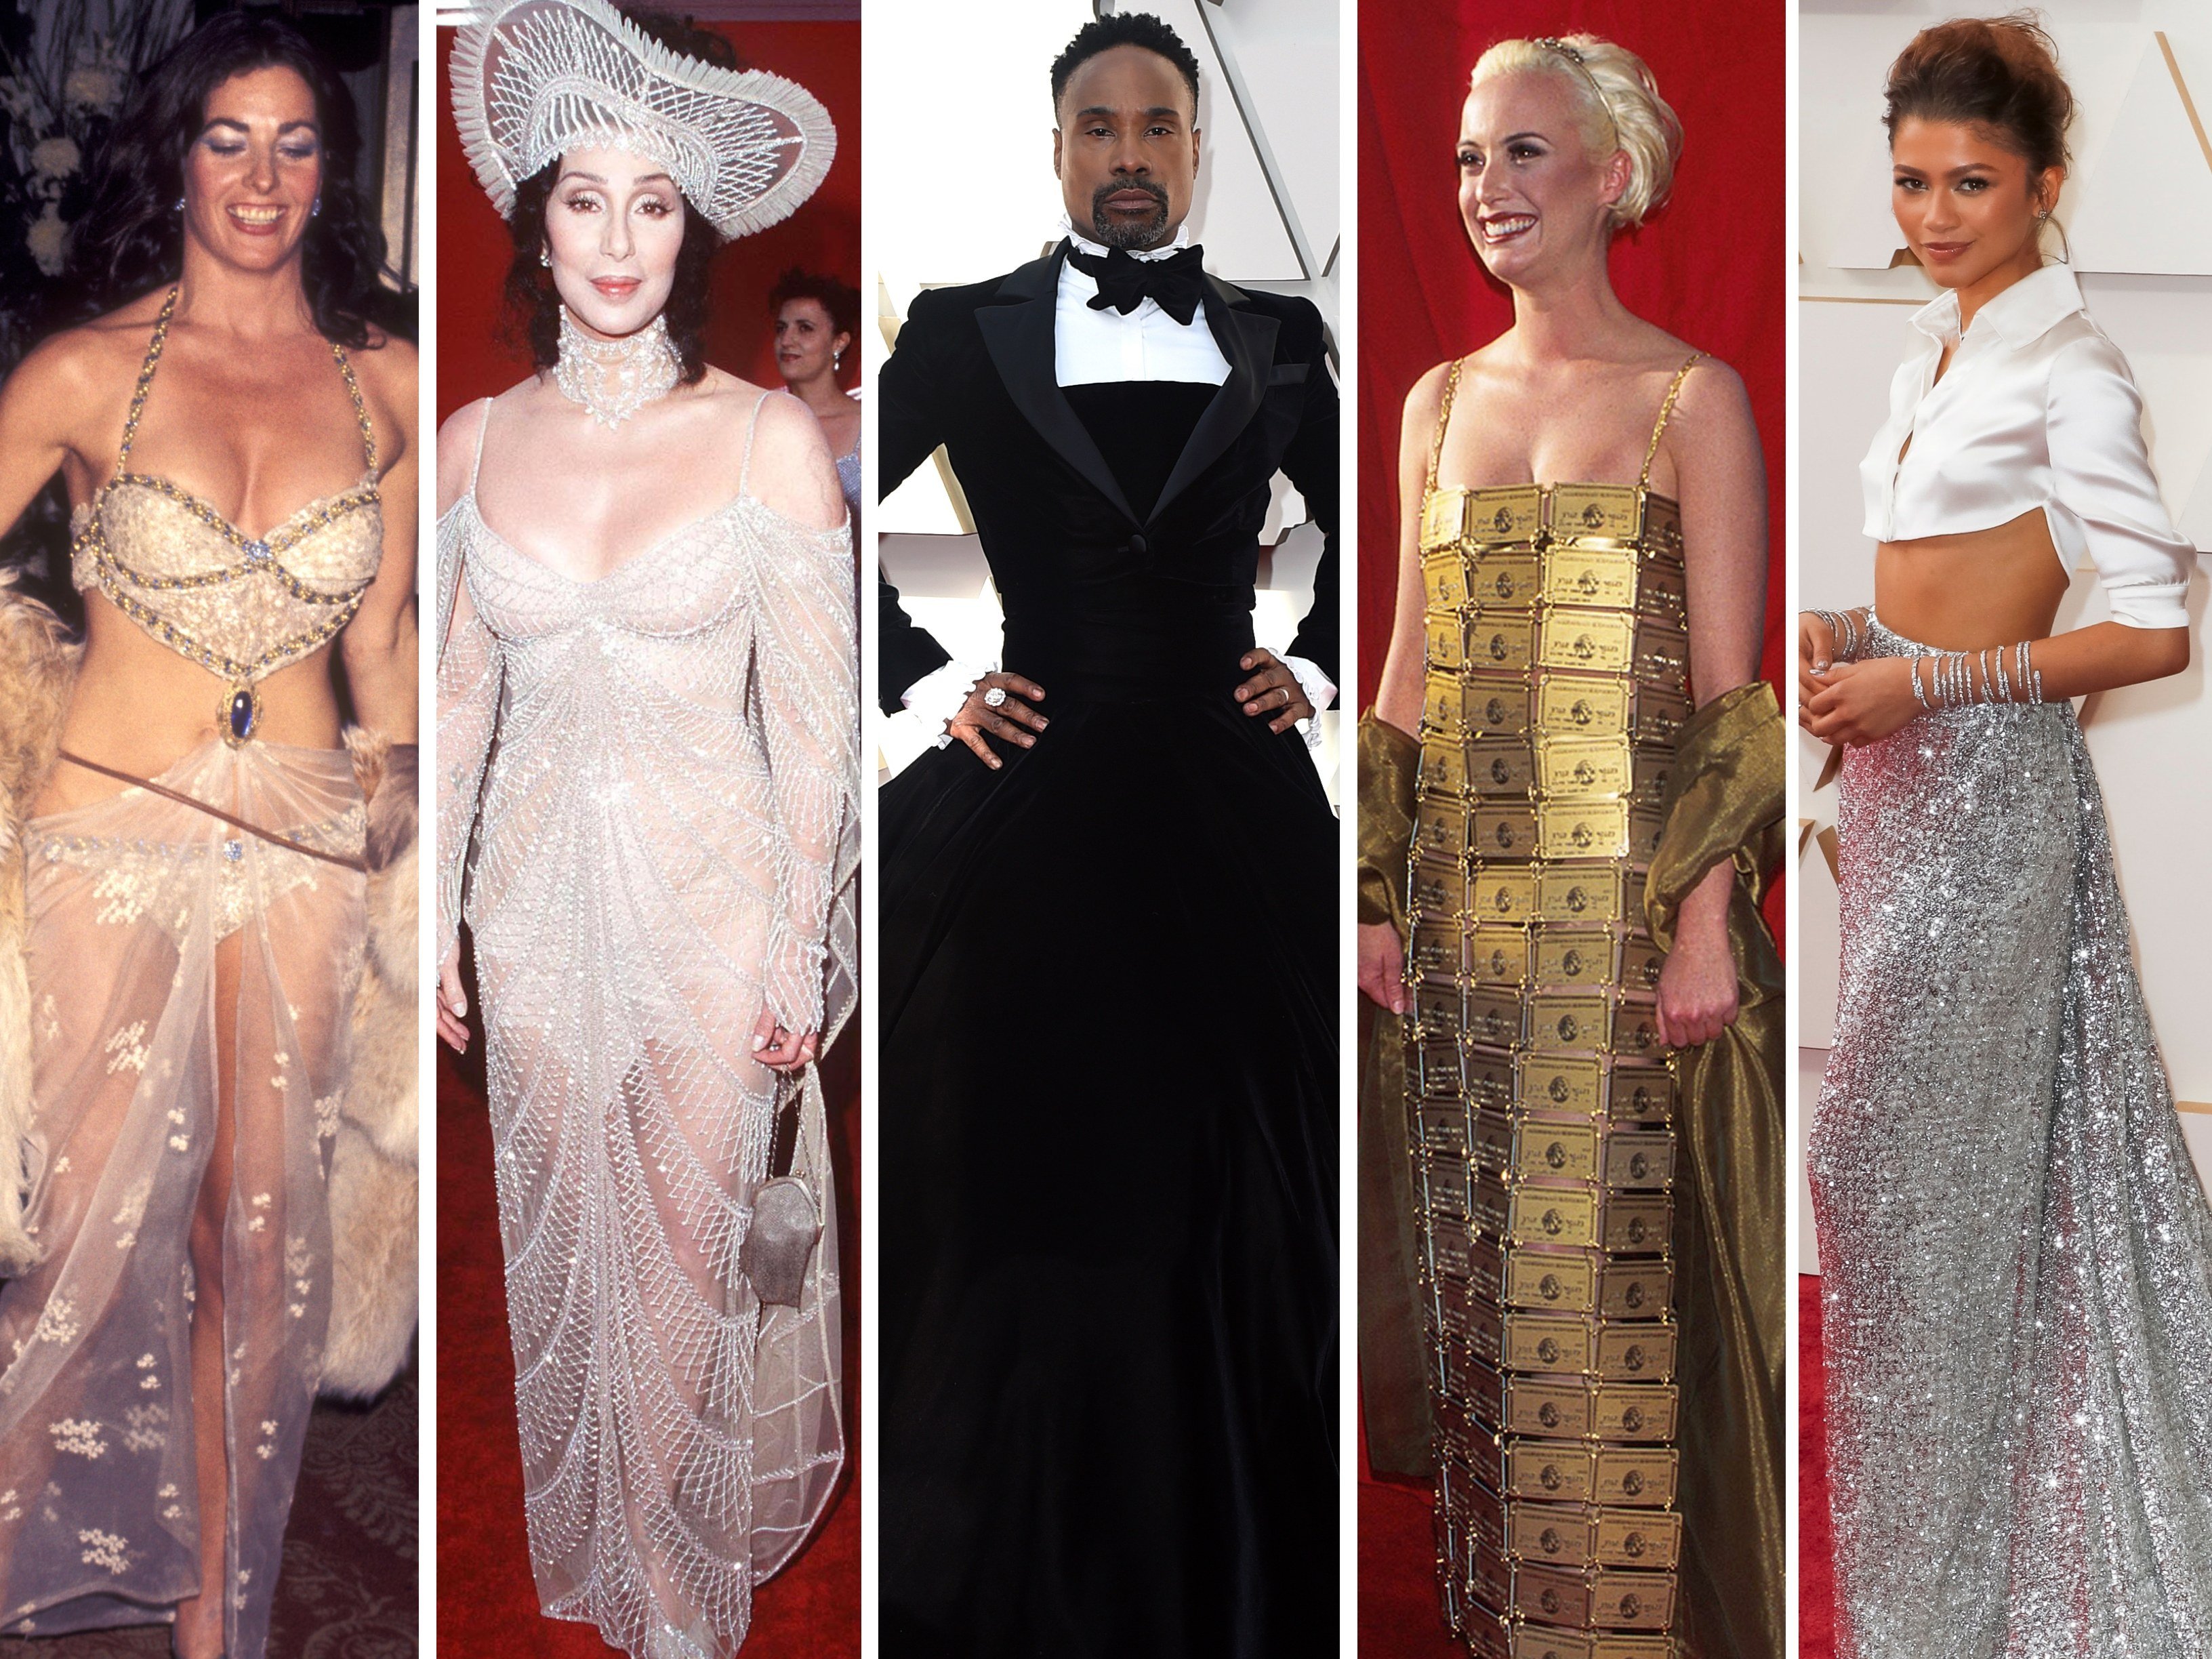 From Edy Williams and Cher’s revealing looks to Billy Porter’s tuxedo gown, a dress made of Amex and Zendaya’s Sharon Stone tribute, some stars pull out all the stops for the Oscars red carpet. Photos: Getty Images, AP, EPA